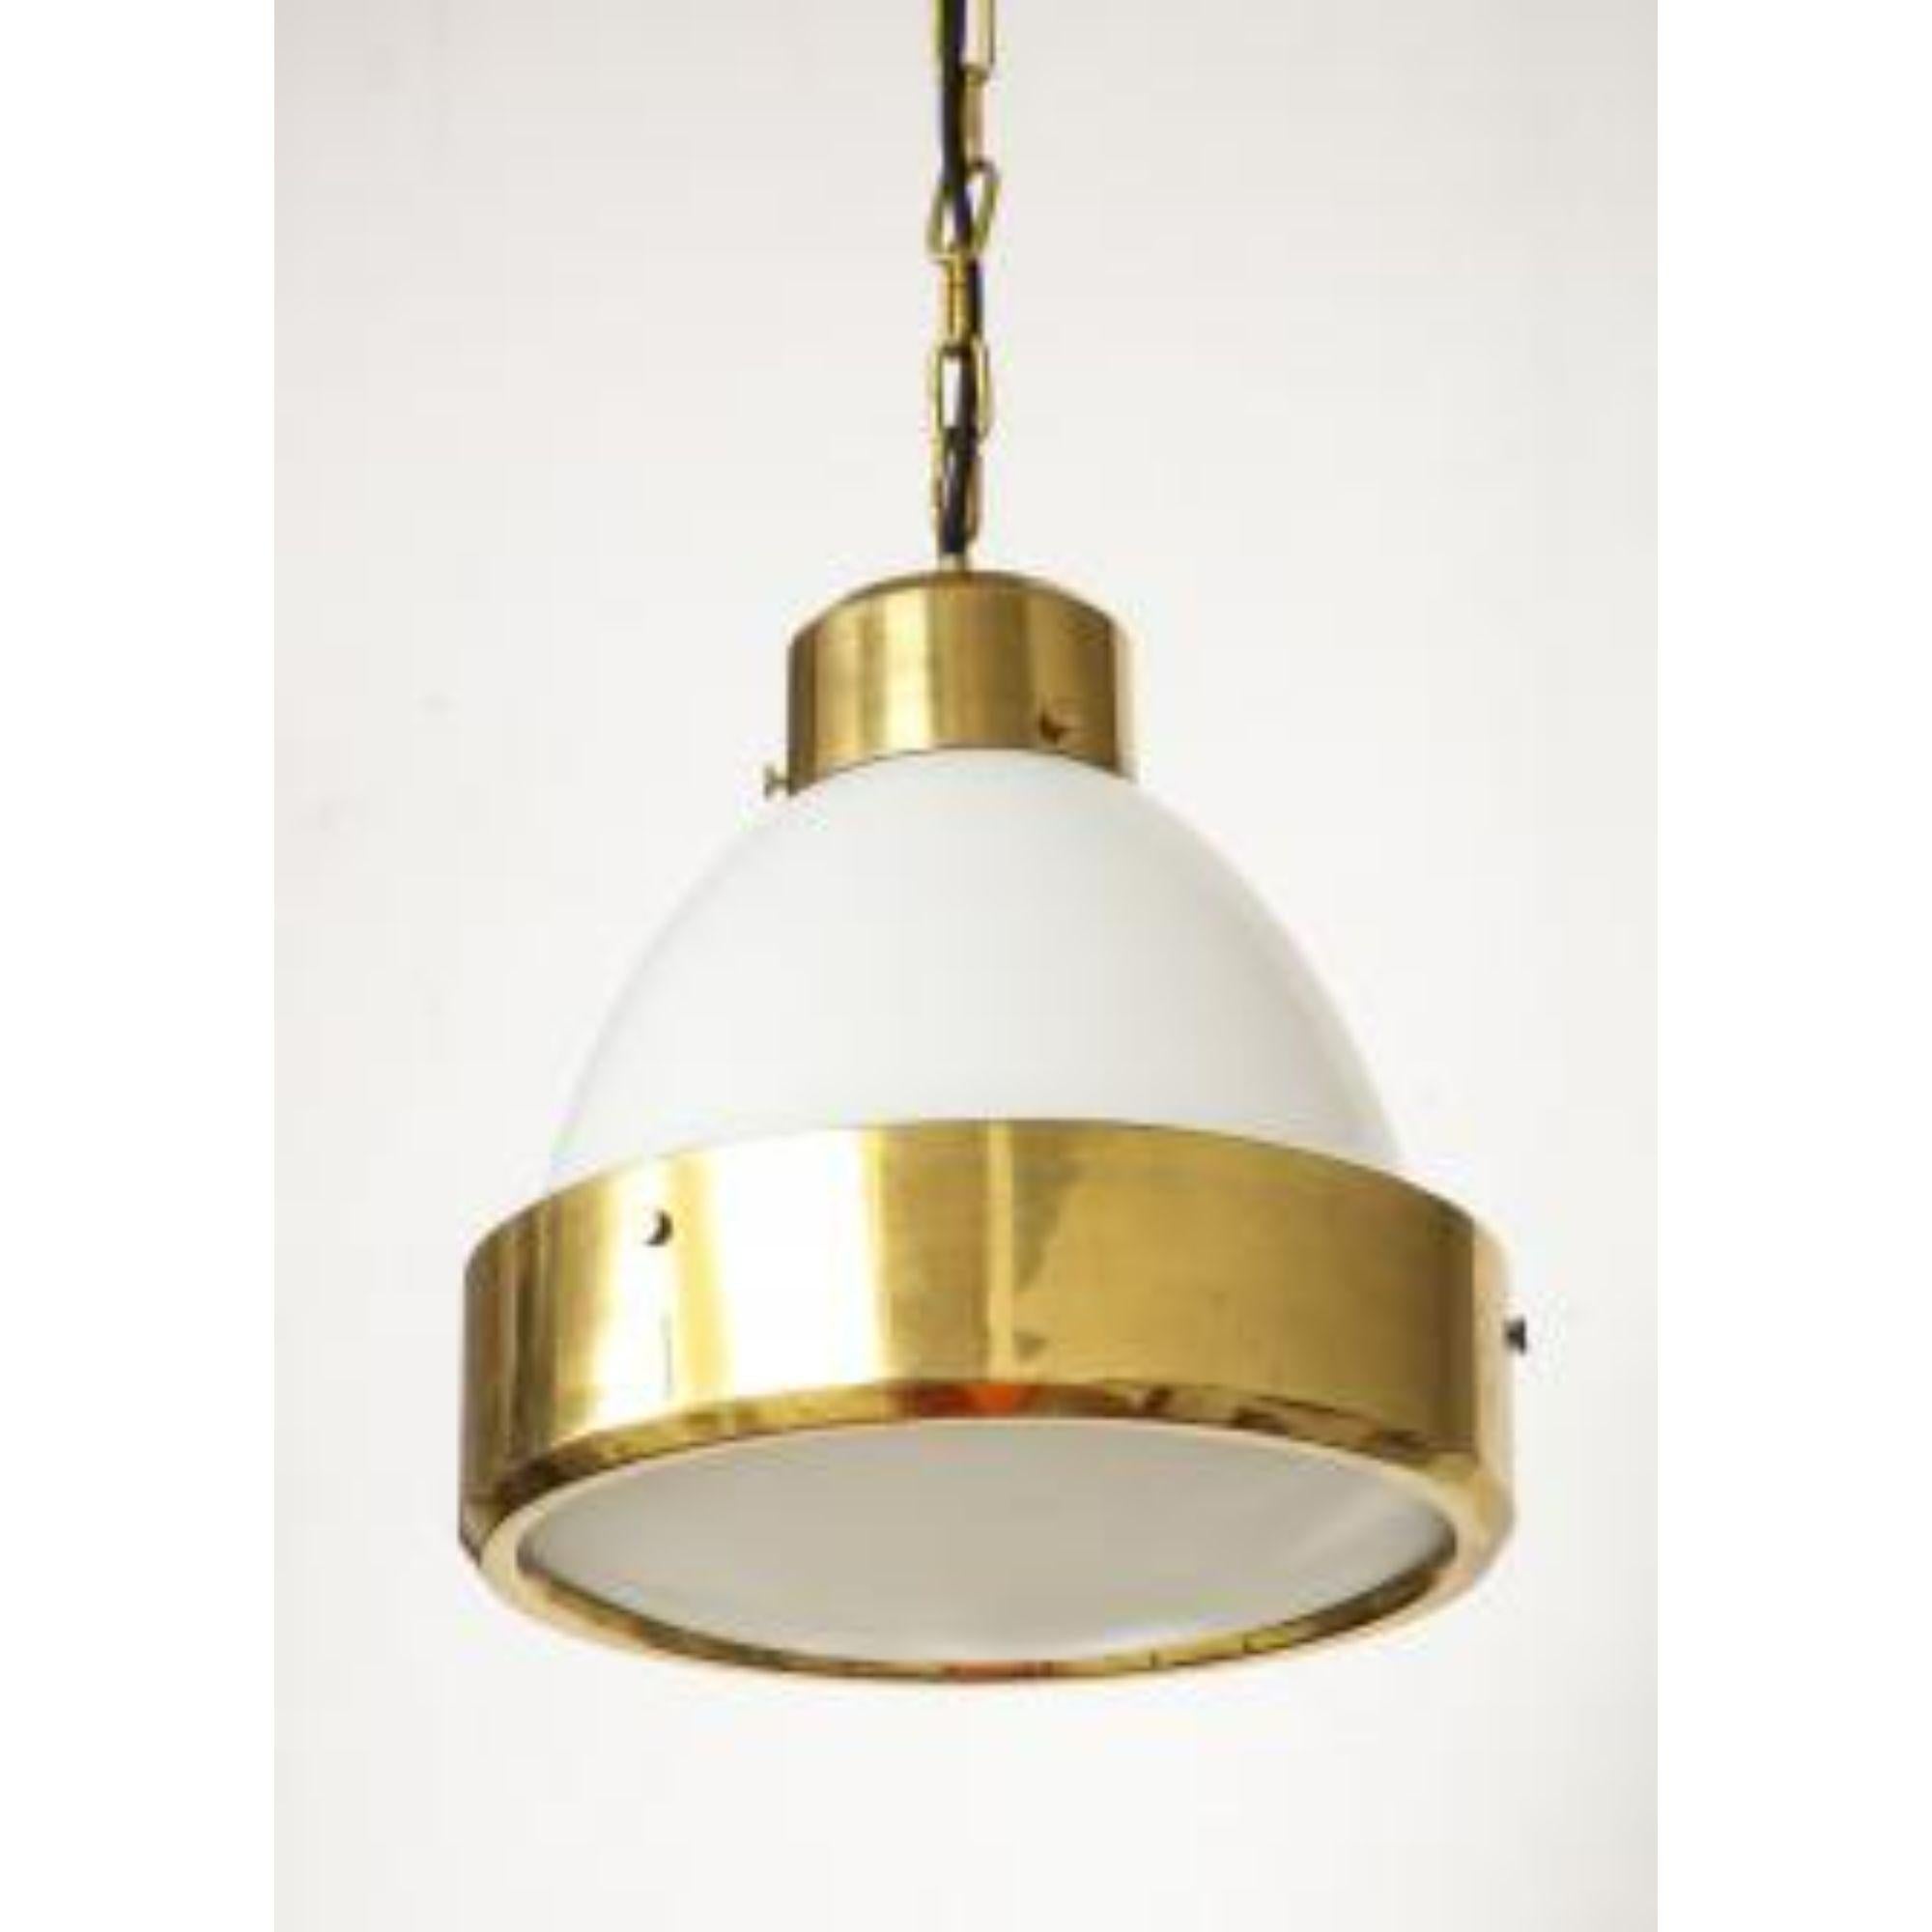 Midcentury Pendant in Brass and White Opaline Glass, Mid-20th Century For Sale 1